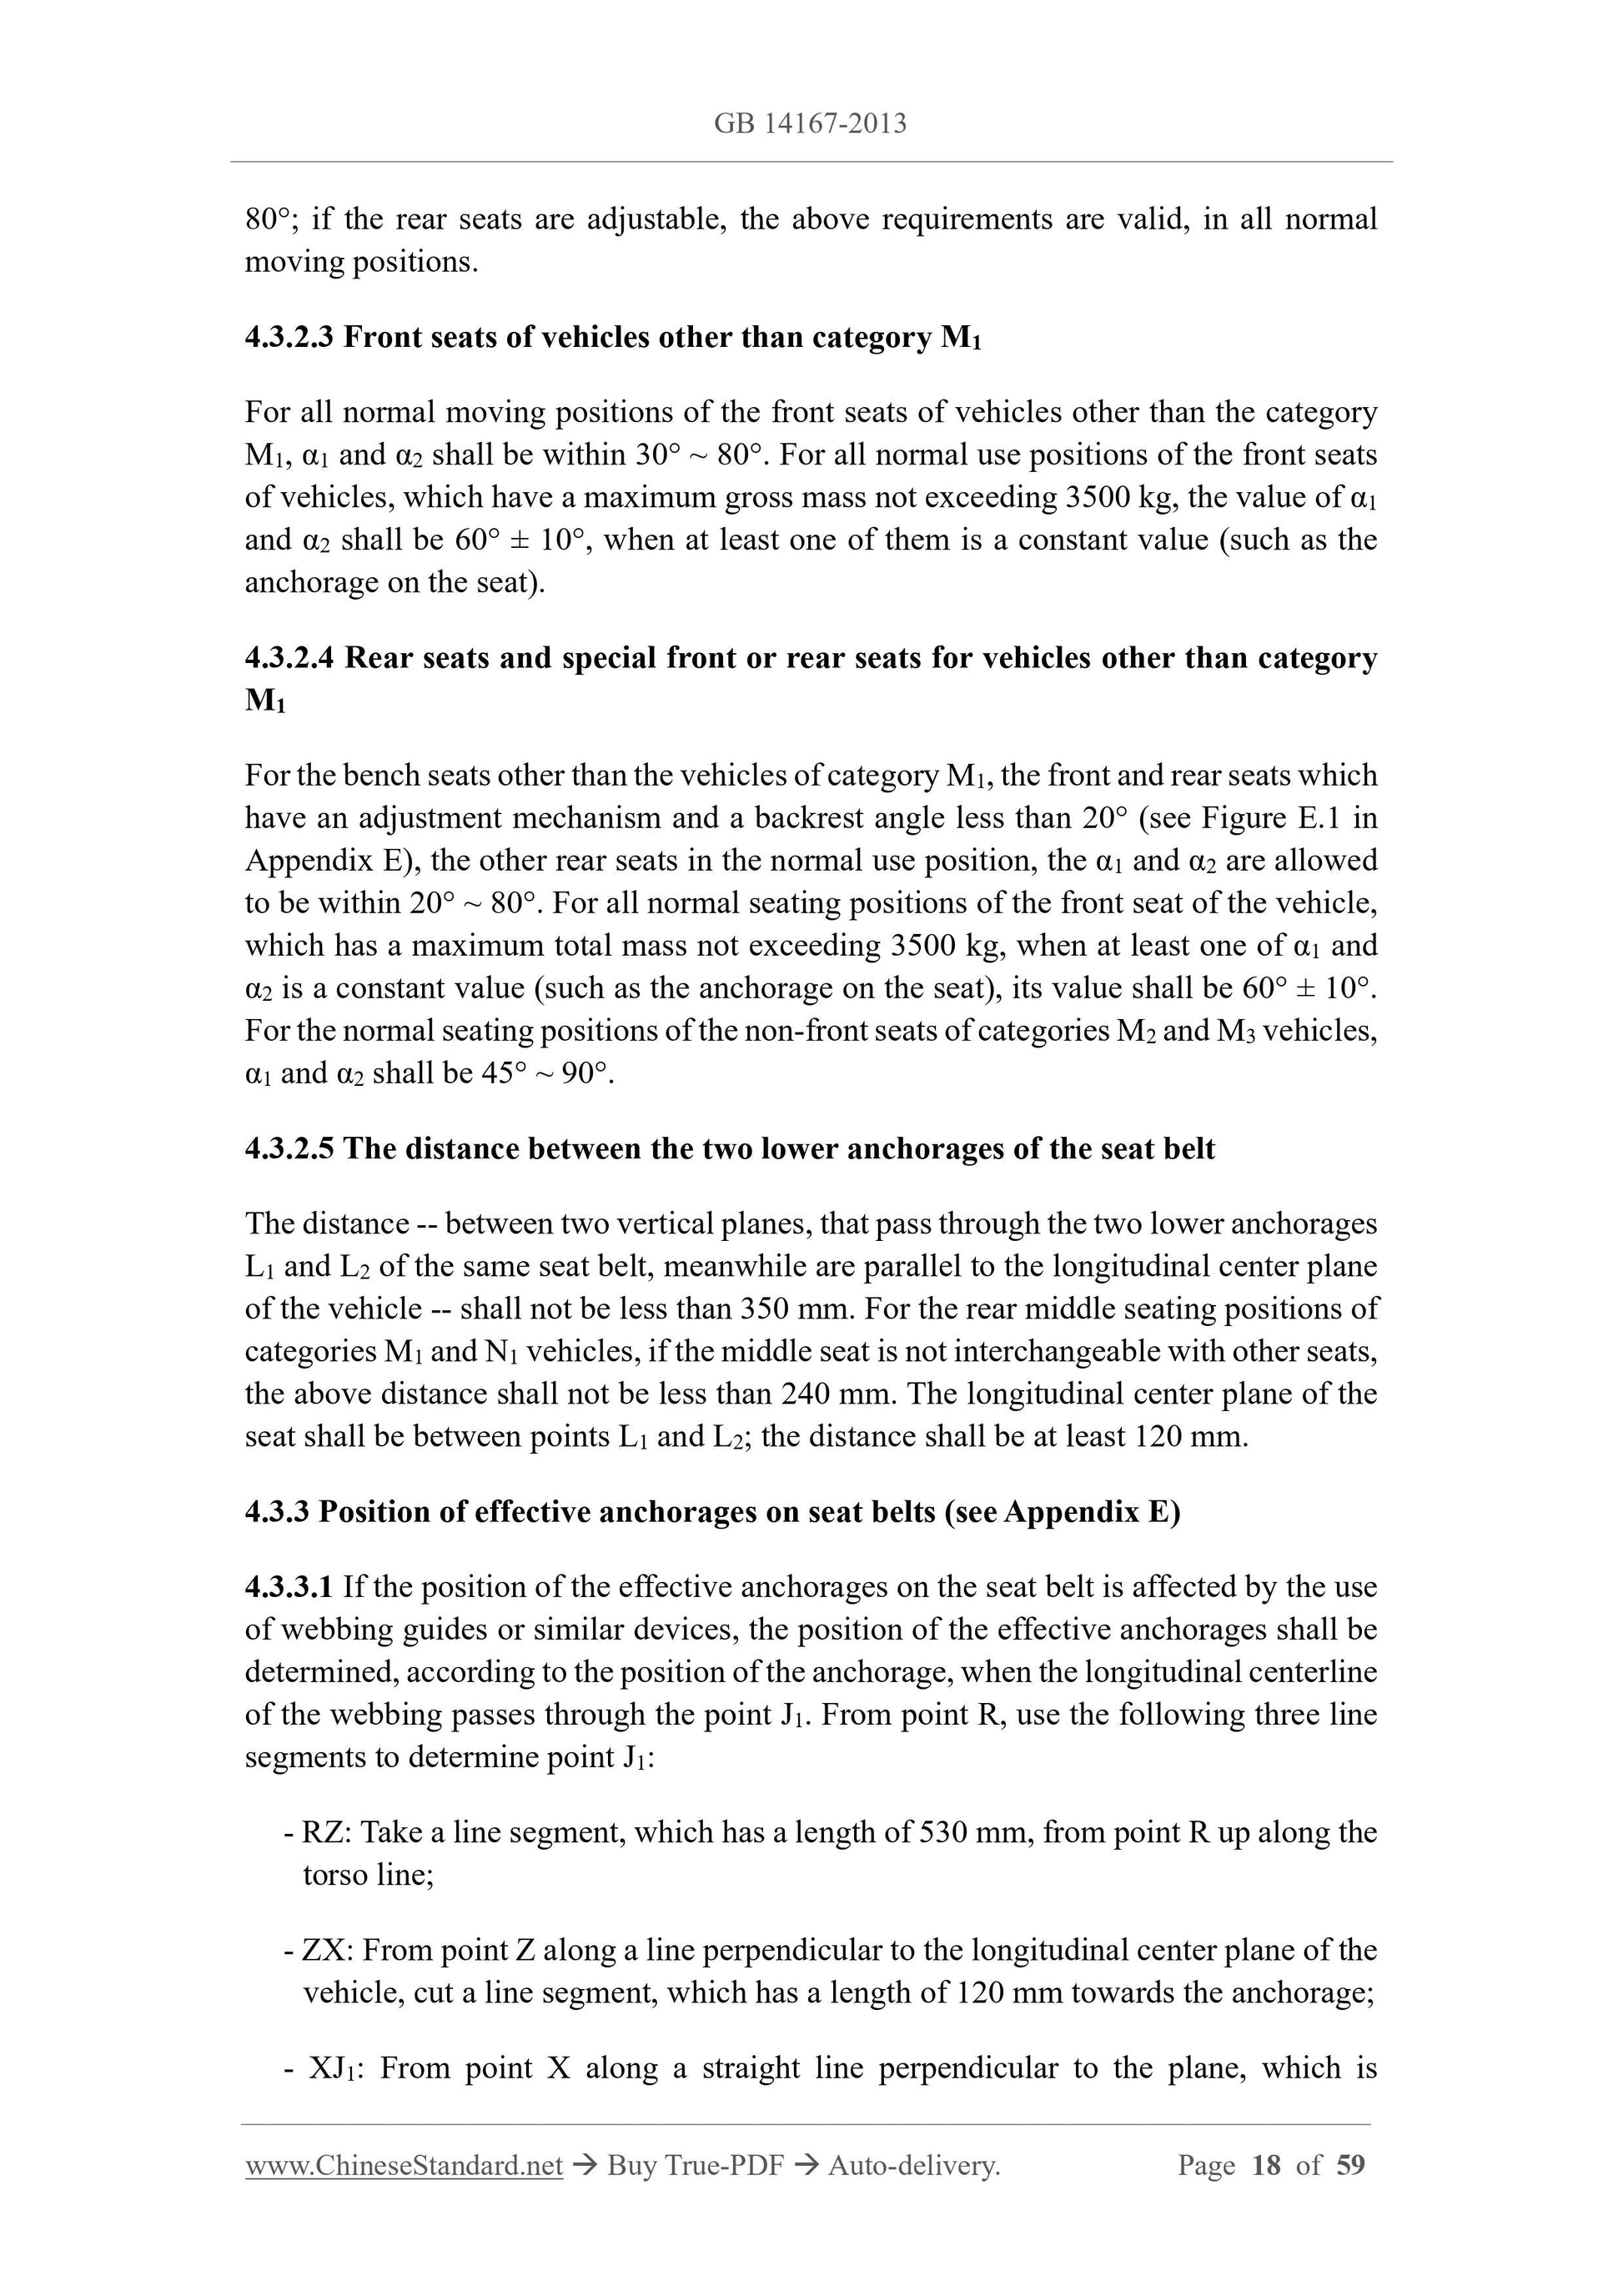 GB 14167-2013 Page 8